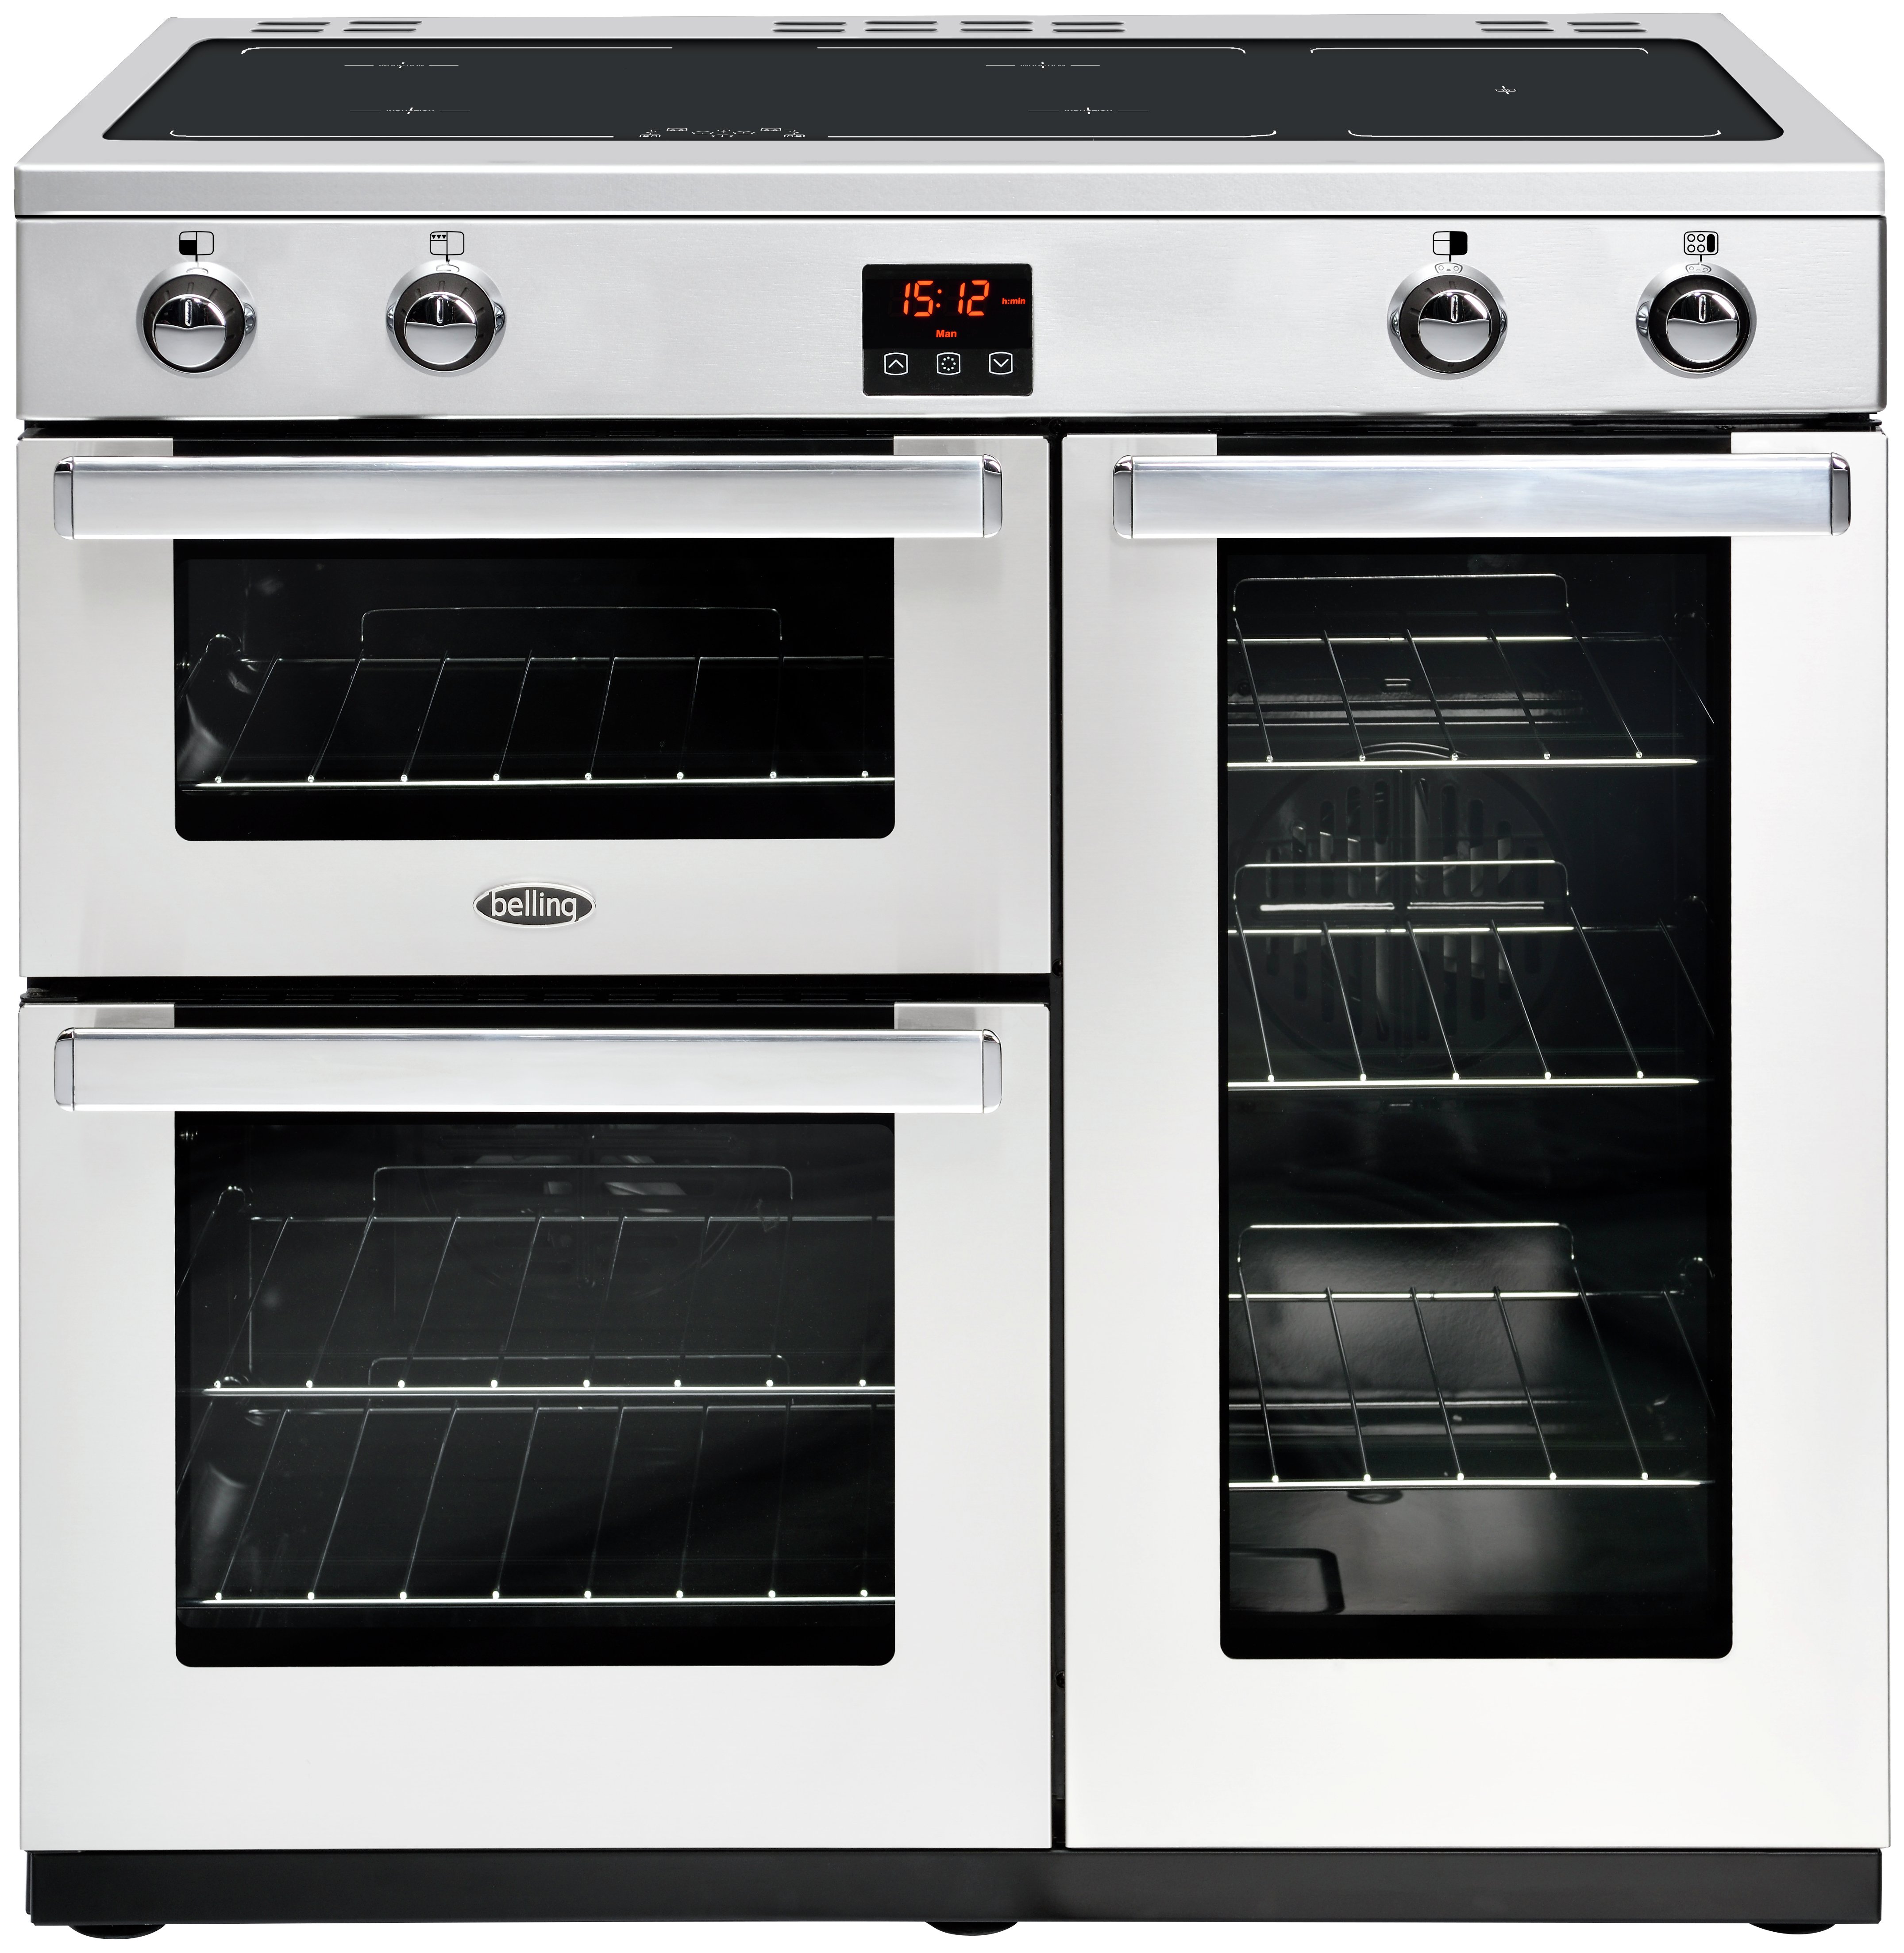 belling-cookcentre-90ei-electric-range-cooker-reviews